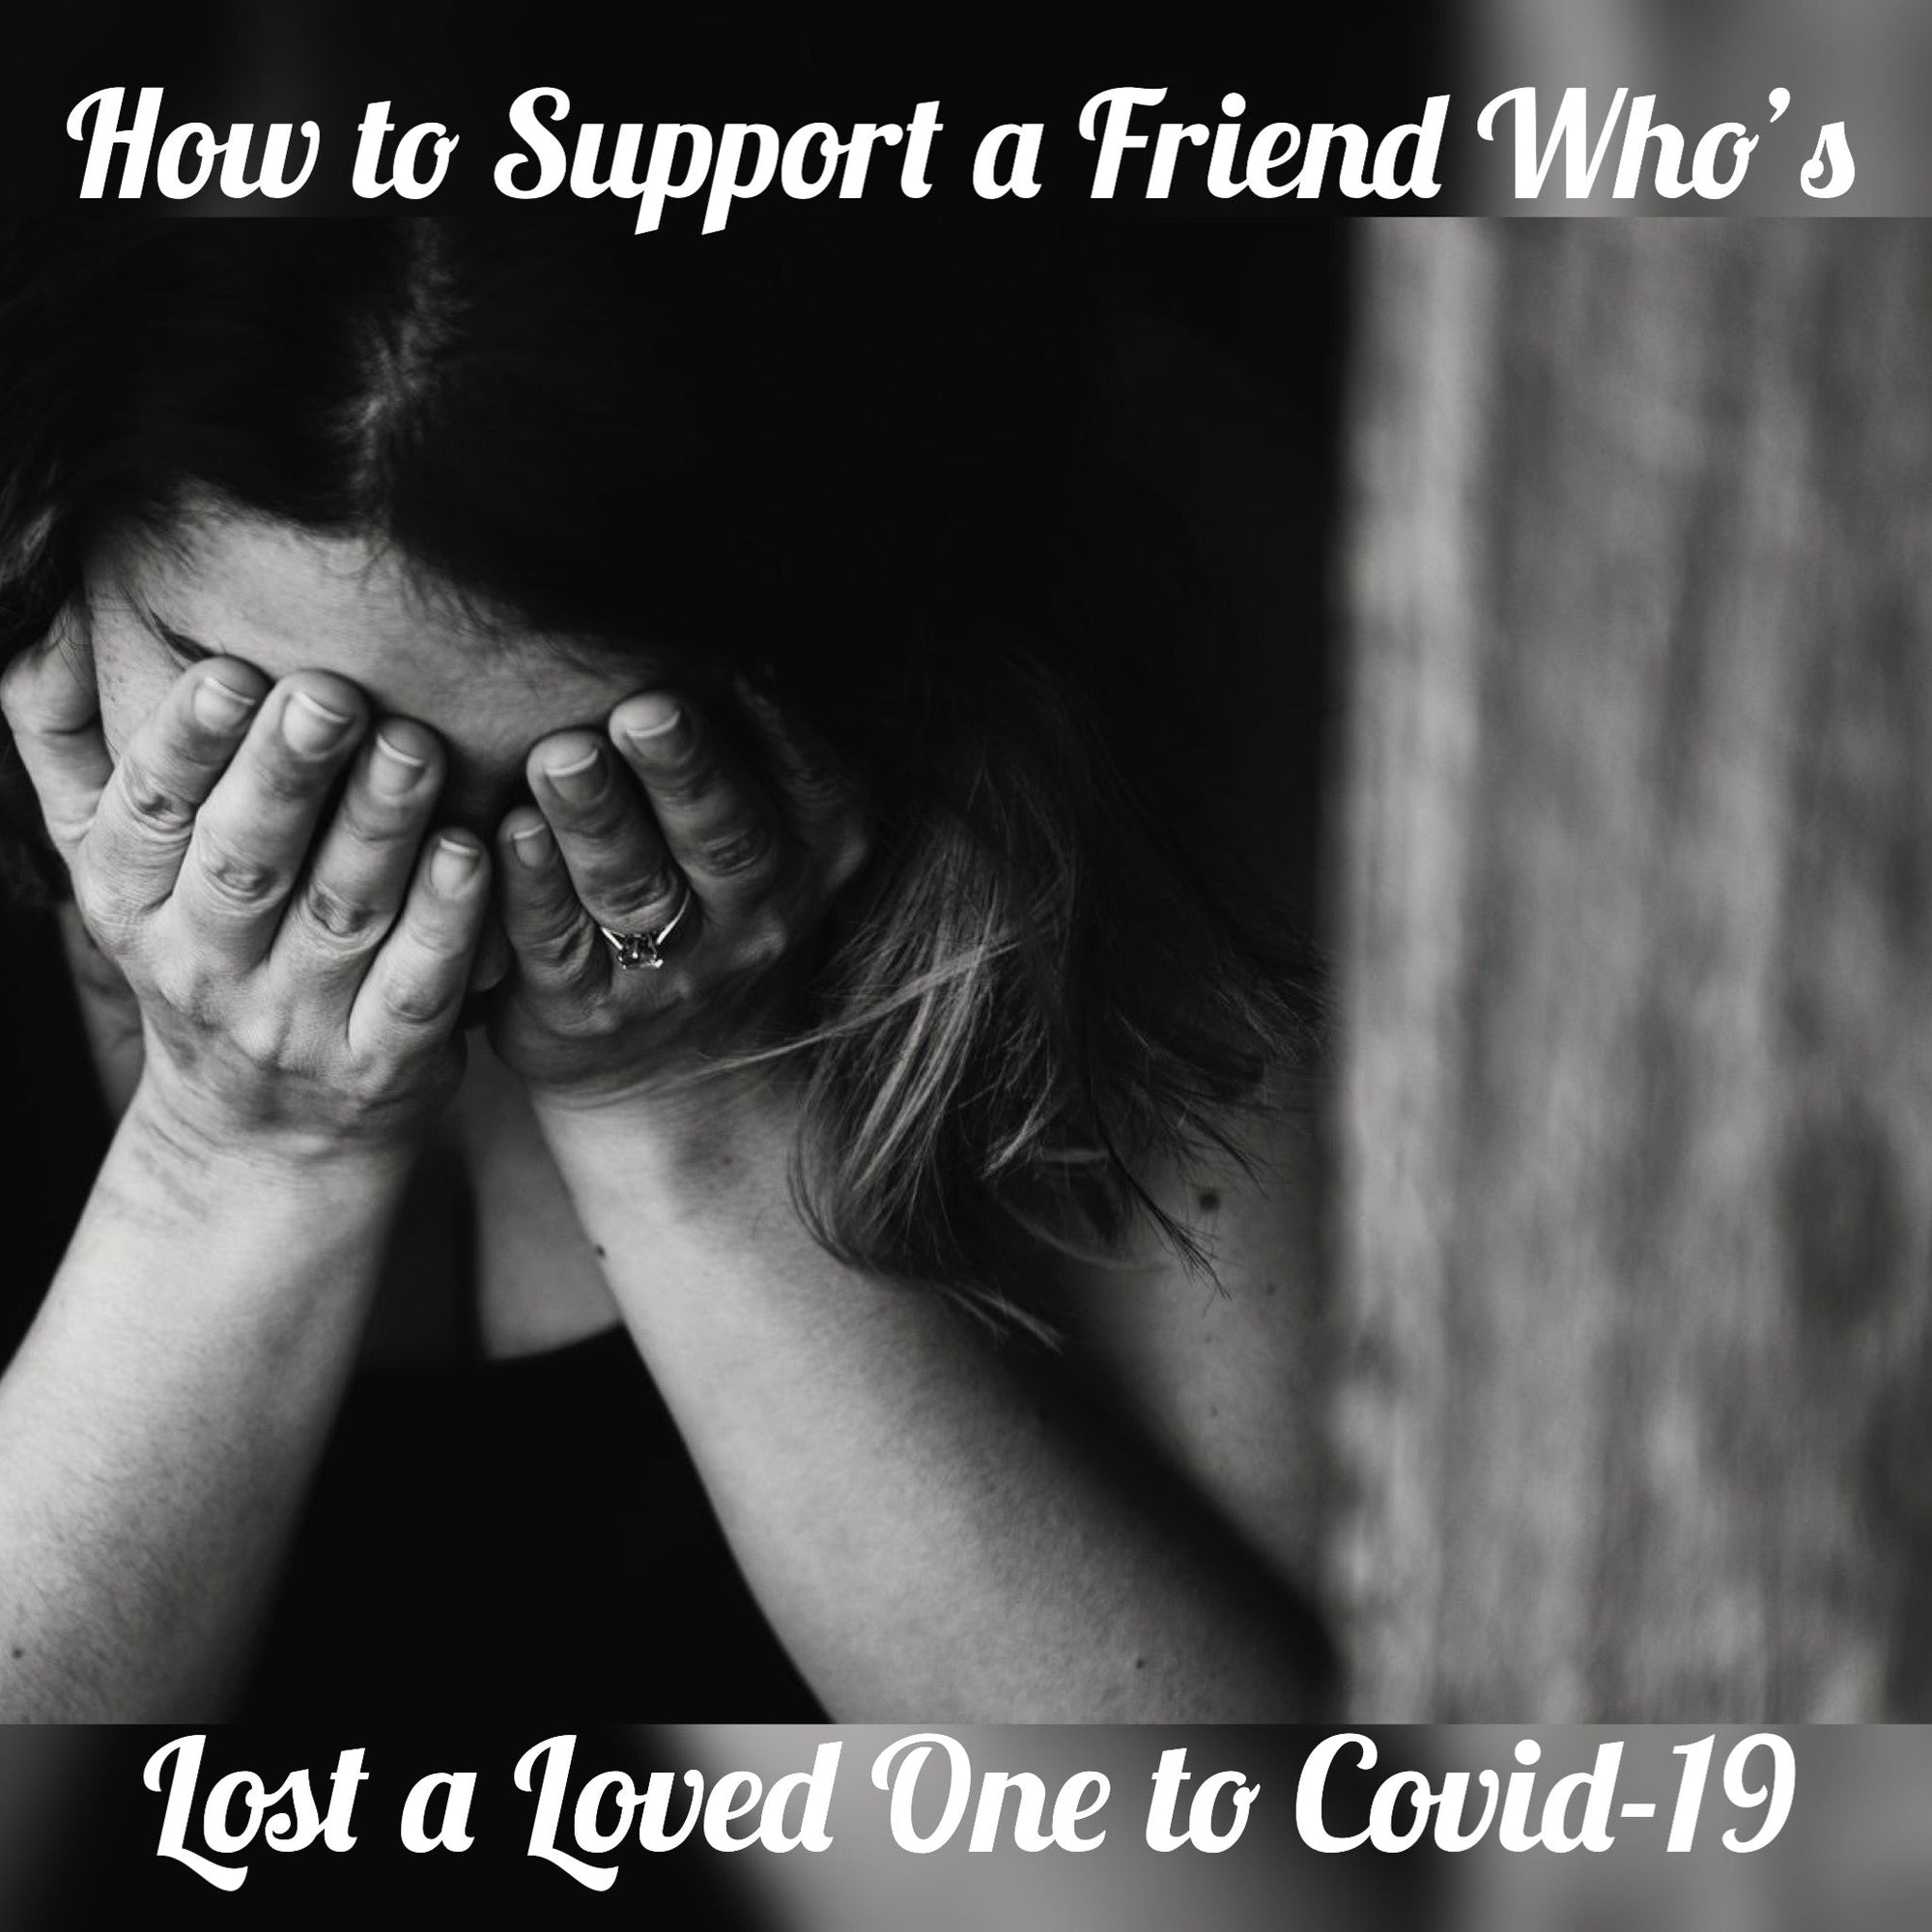 How to Support a Friend or Family That Has Lost Someone to Covid-19 - Mi LegaSi